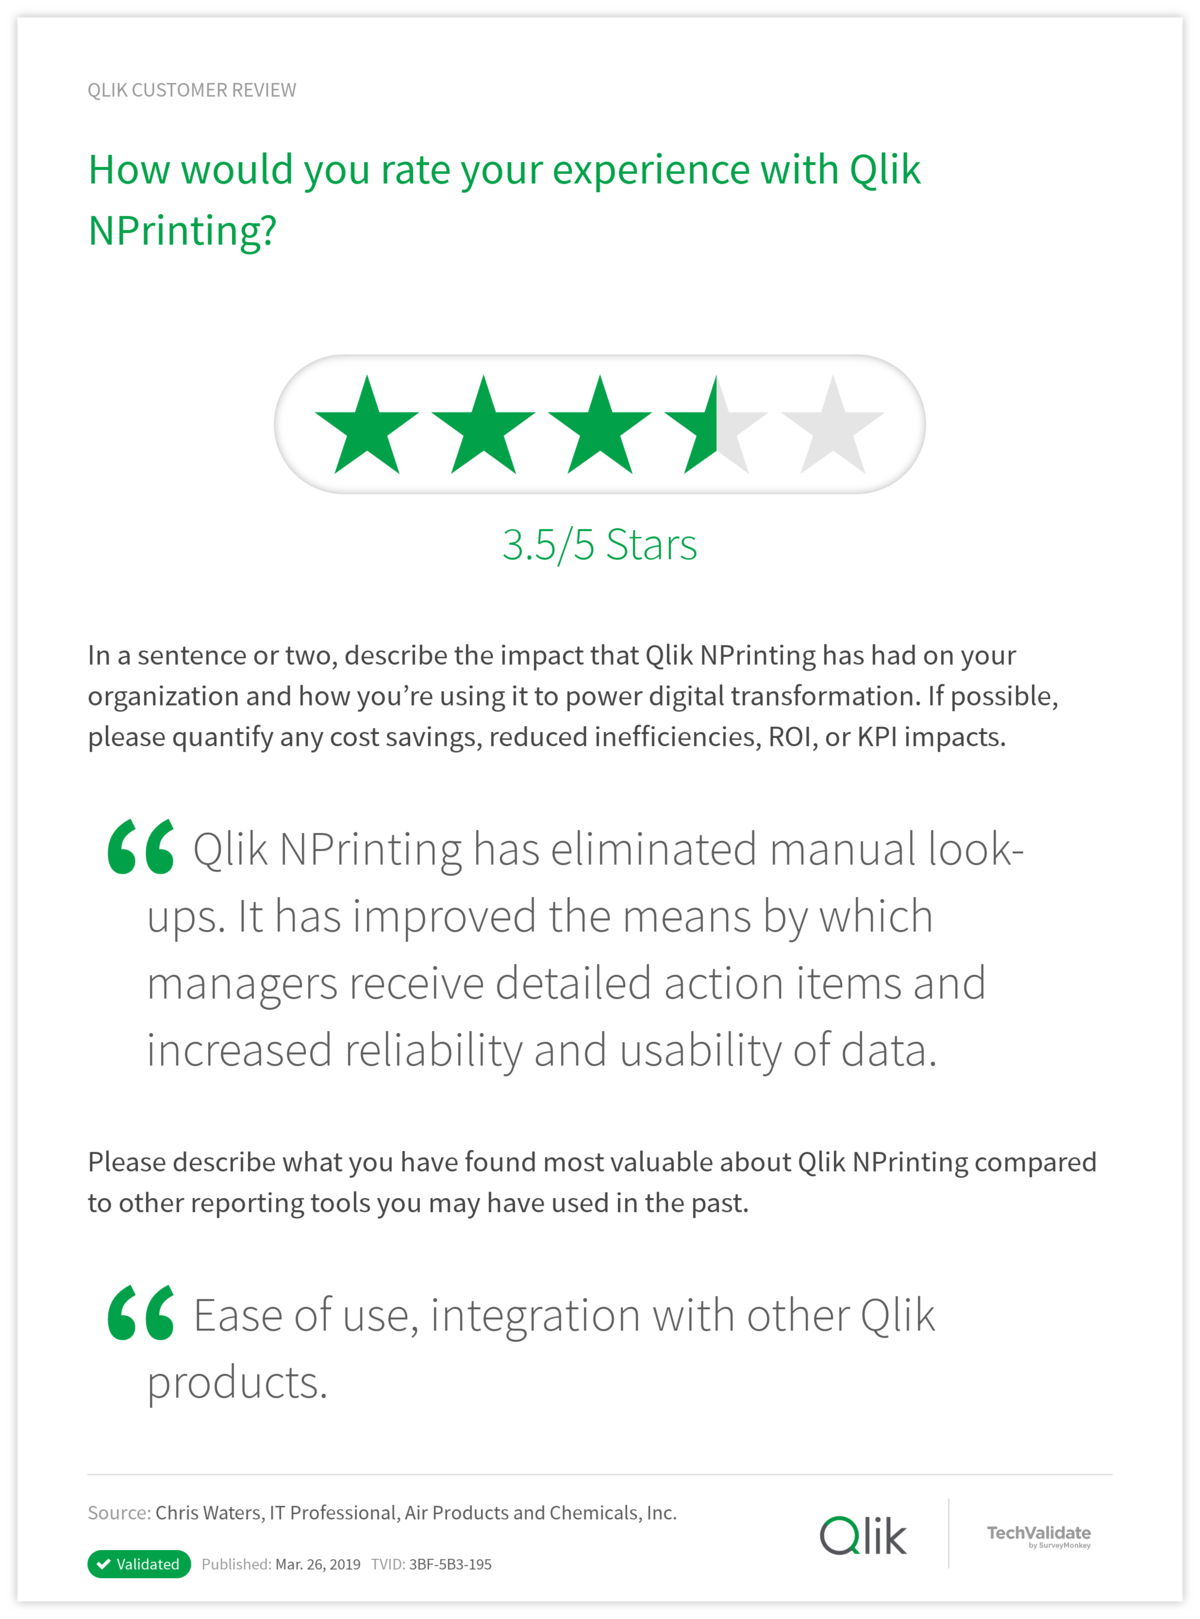 How would you rate your experience with Qlik NPrinting?